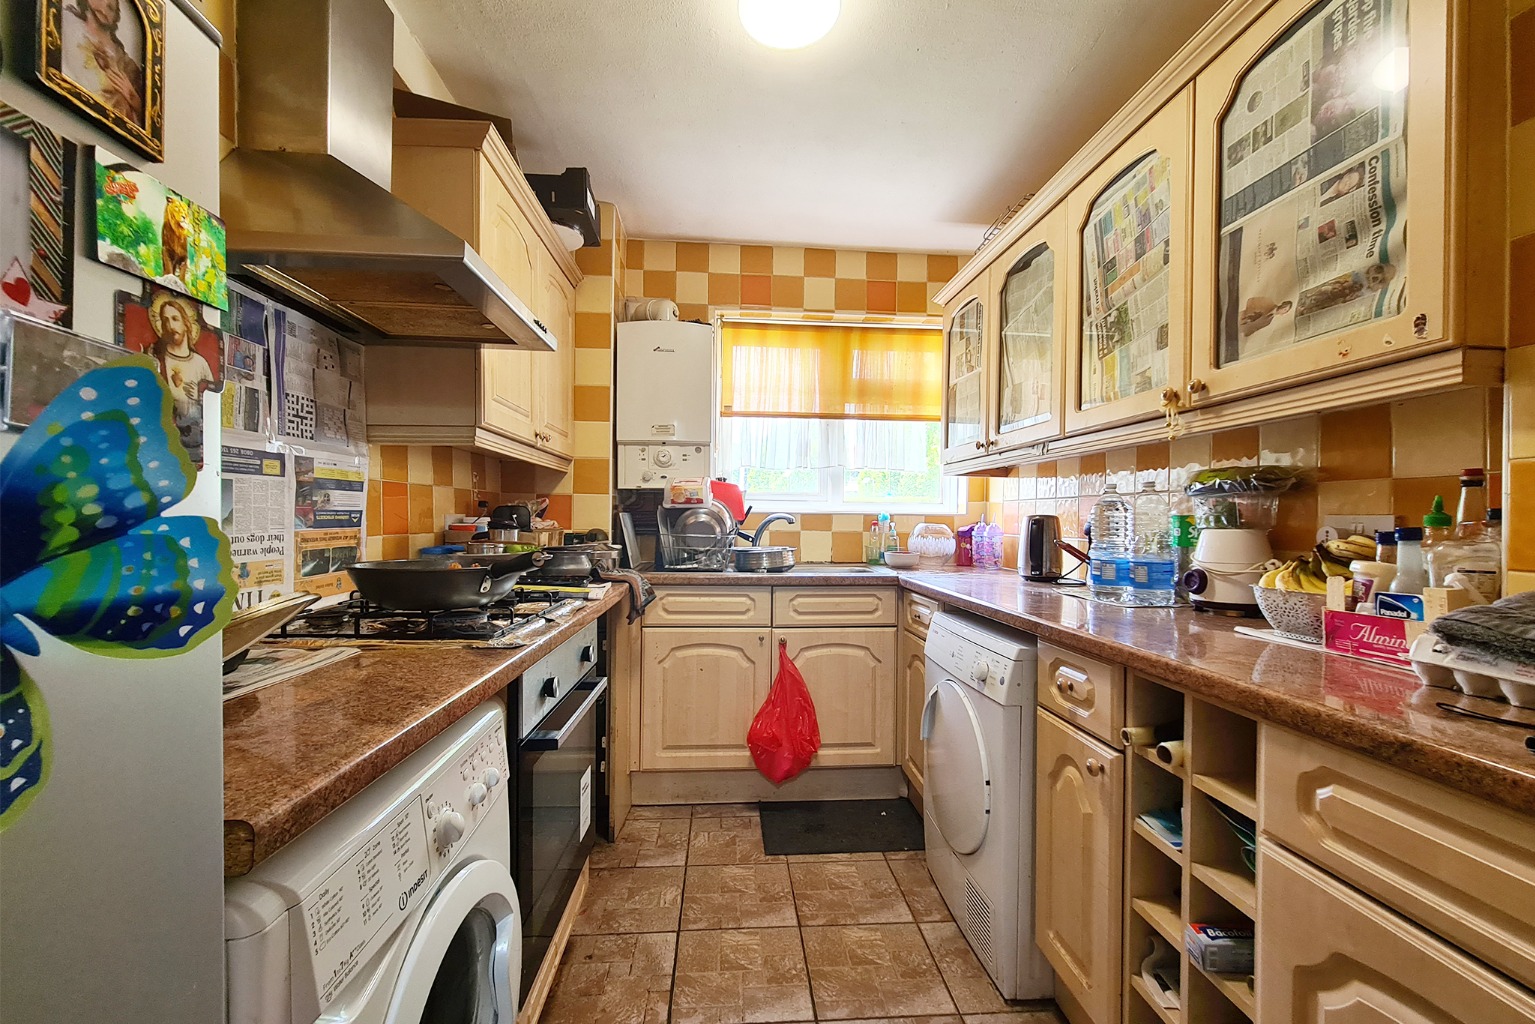 2 bed flat for sale  - Property Image 5